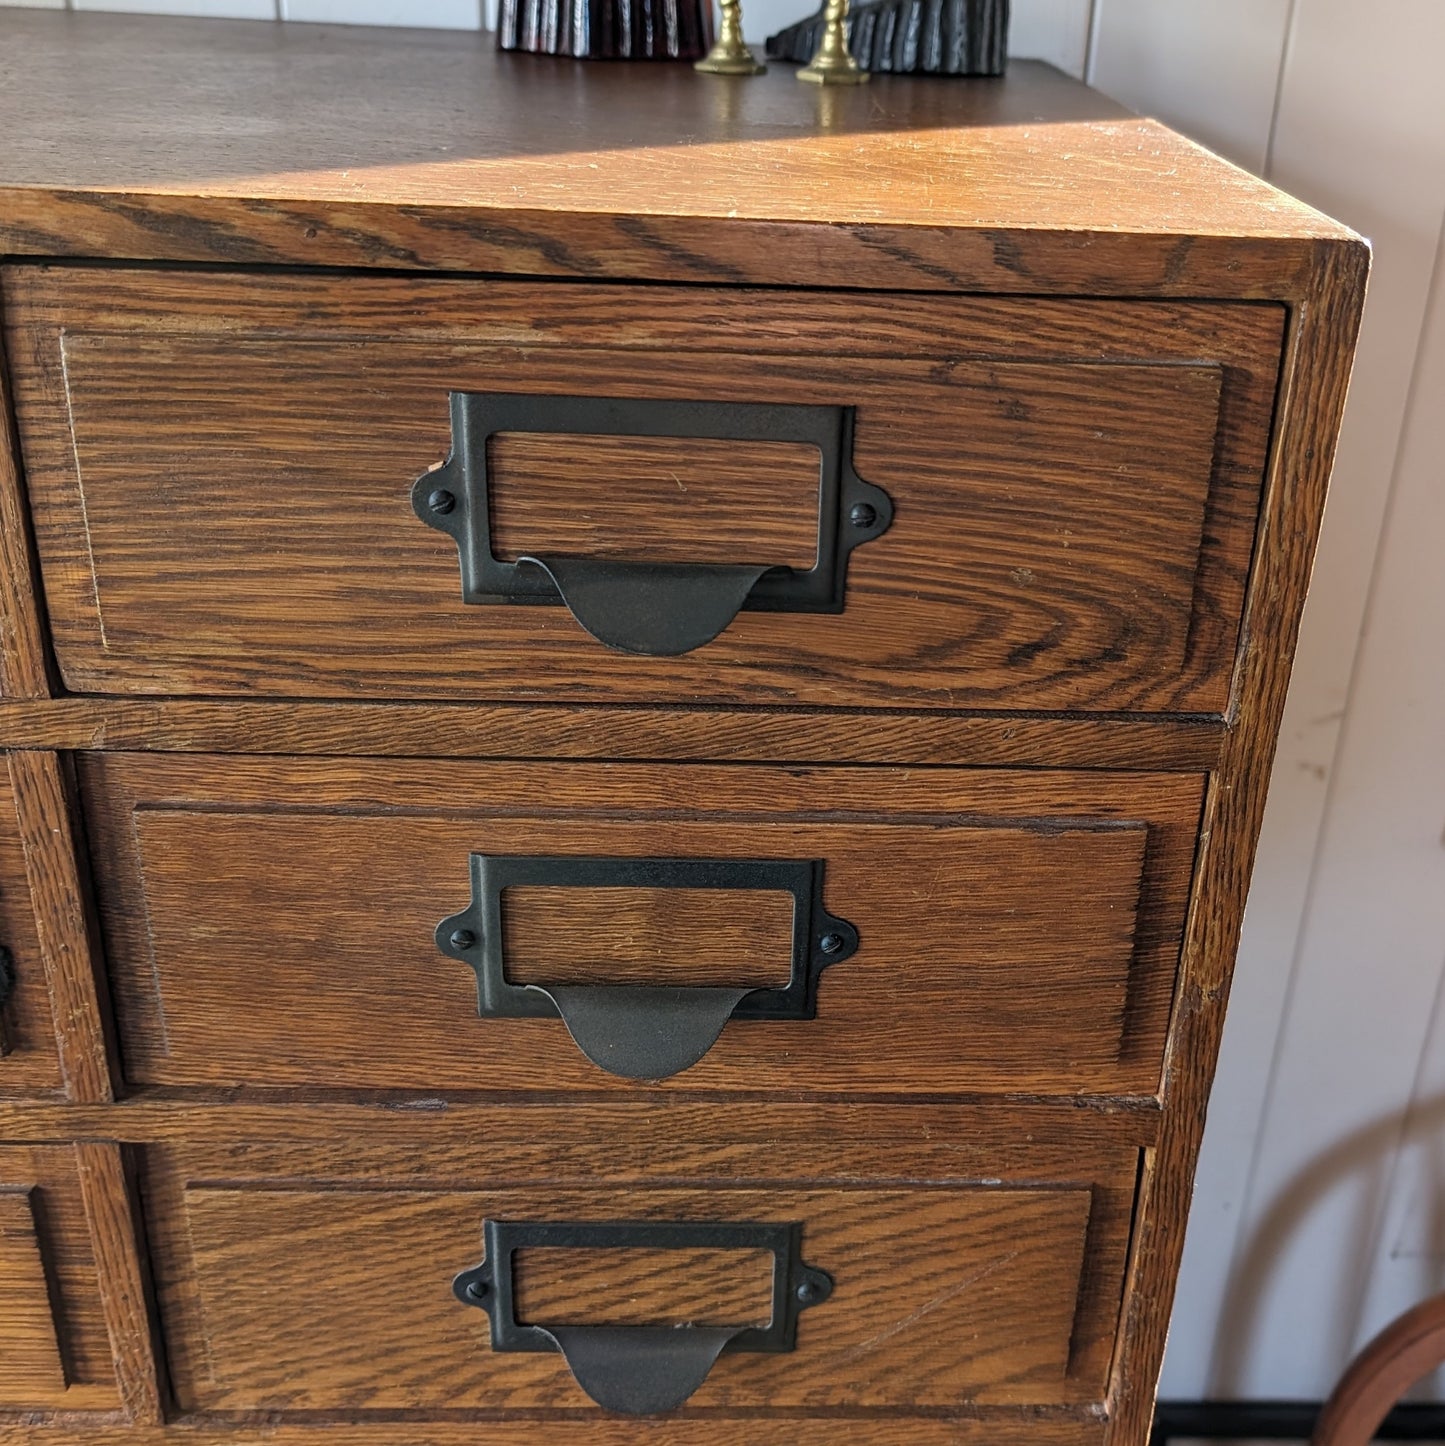 Antique Bank of Drawers